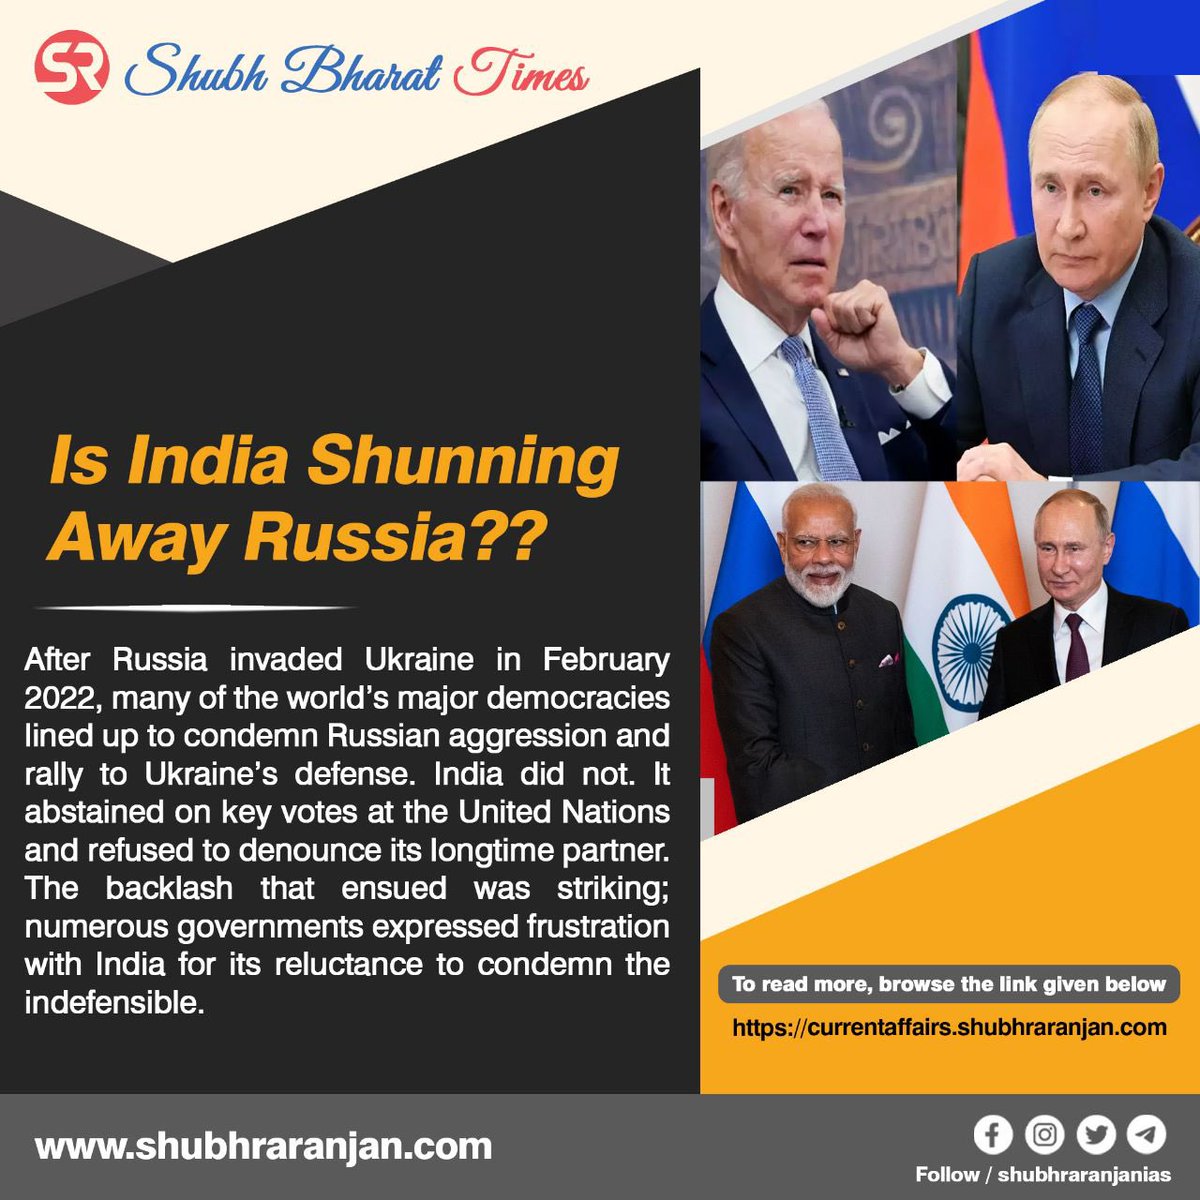 Is India Shunning Away Russia? 

Article: currentaffairs.shubhraranjan.com

*To read full article, please login with your registered email ID

#upsc #currentaffairs #currentaffair #newsoftheday #upsccurrentaffairs #india #shubhraranjanias #russia #ukraine #unitednations